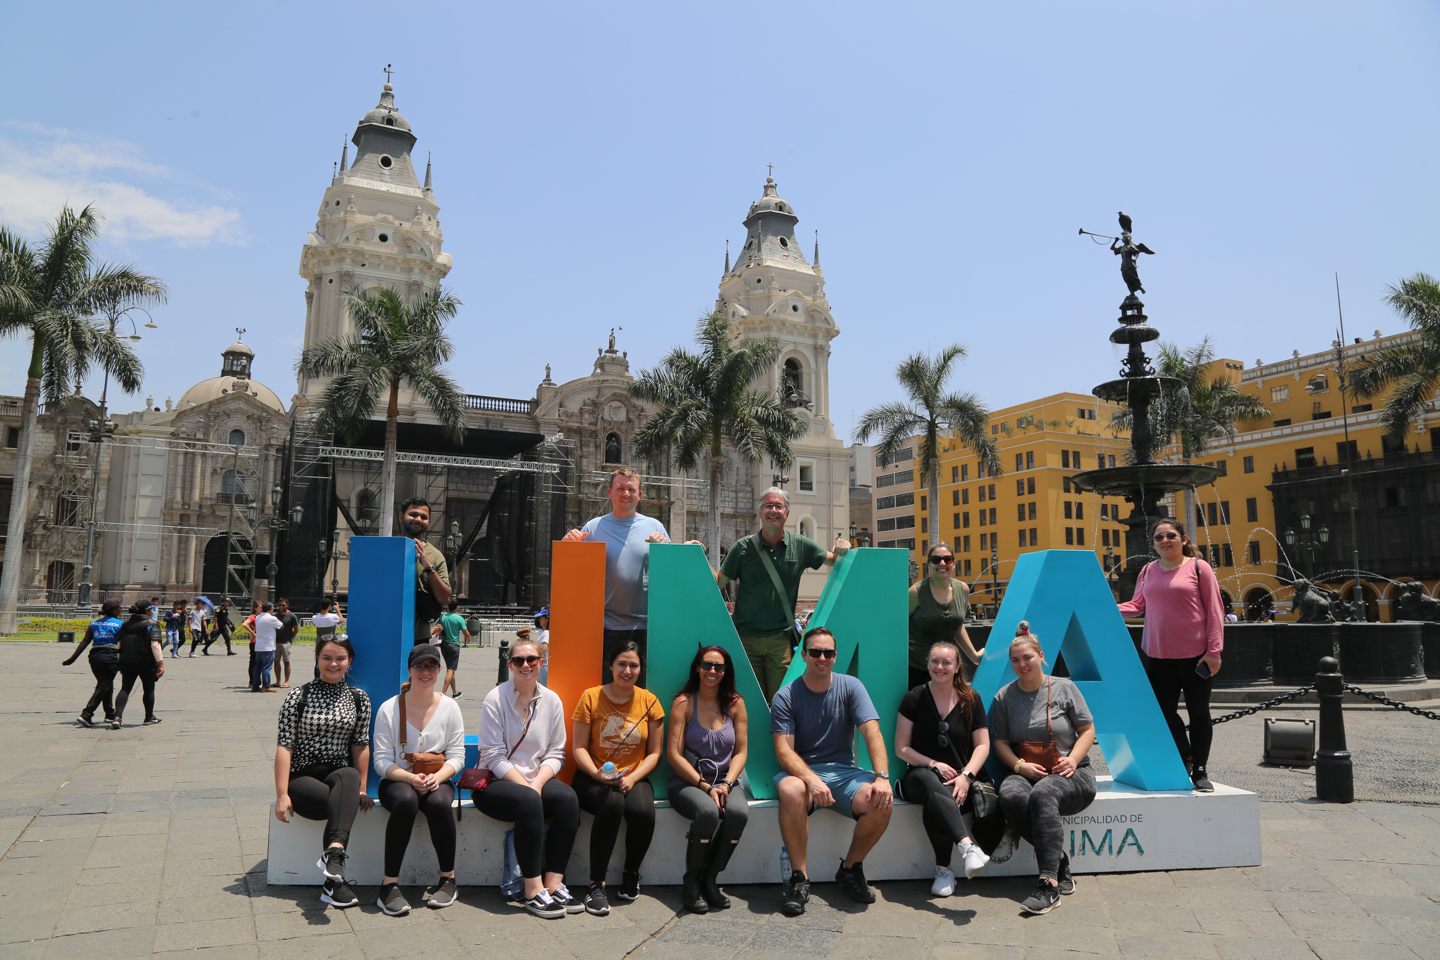 Students pose with cut-out letters that spell "LIMA"